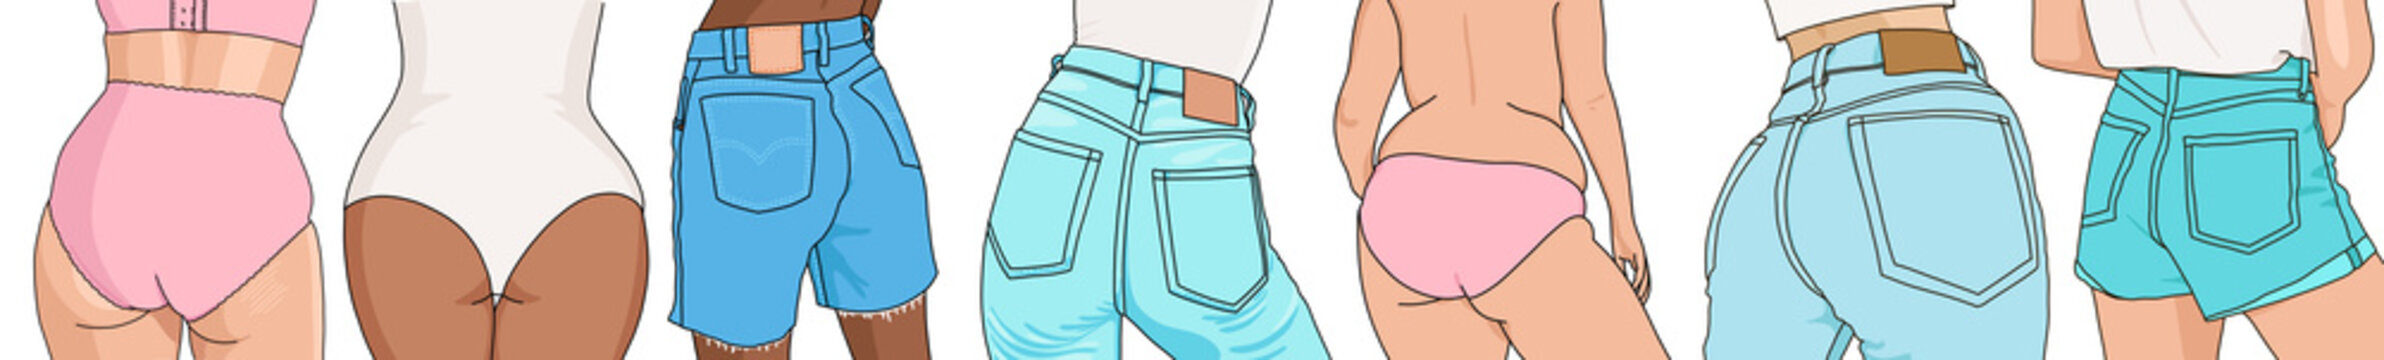 Illustrations of  different shape of women bums, different skin colors wearing jeans shorts and bikinis